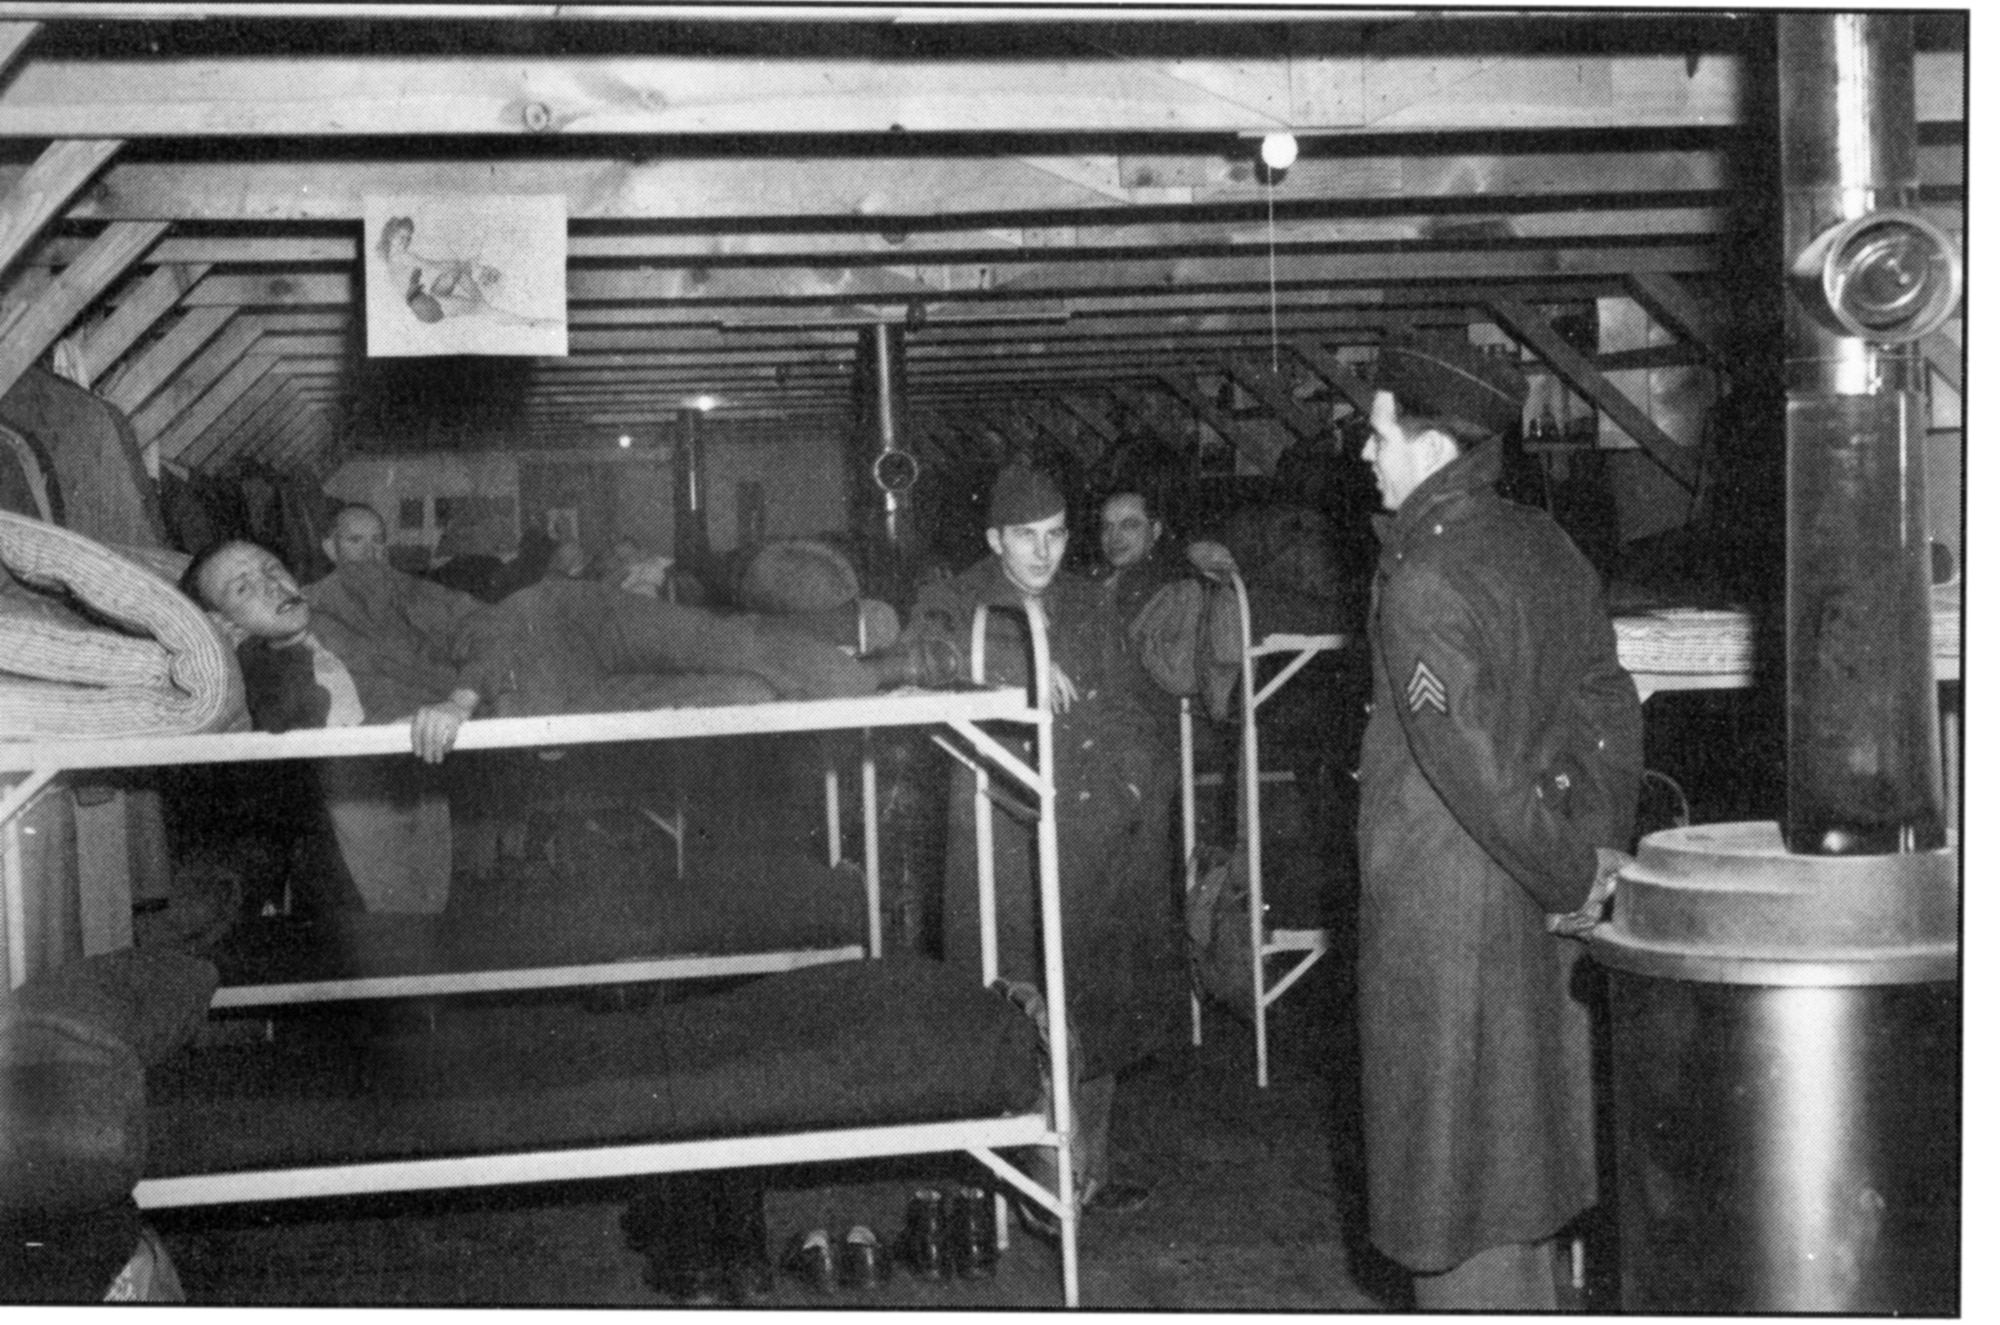 Airmen slept in barracks like these in the early 40's. Above the rack to the left is a photo of Betty Grable and in the foreground is a coke-burning stove. Each barracks contained three stoves. (Photo courtesy of the Malmstrom Museum)